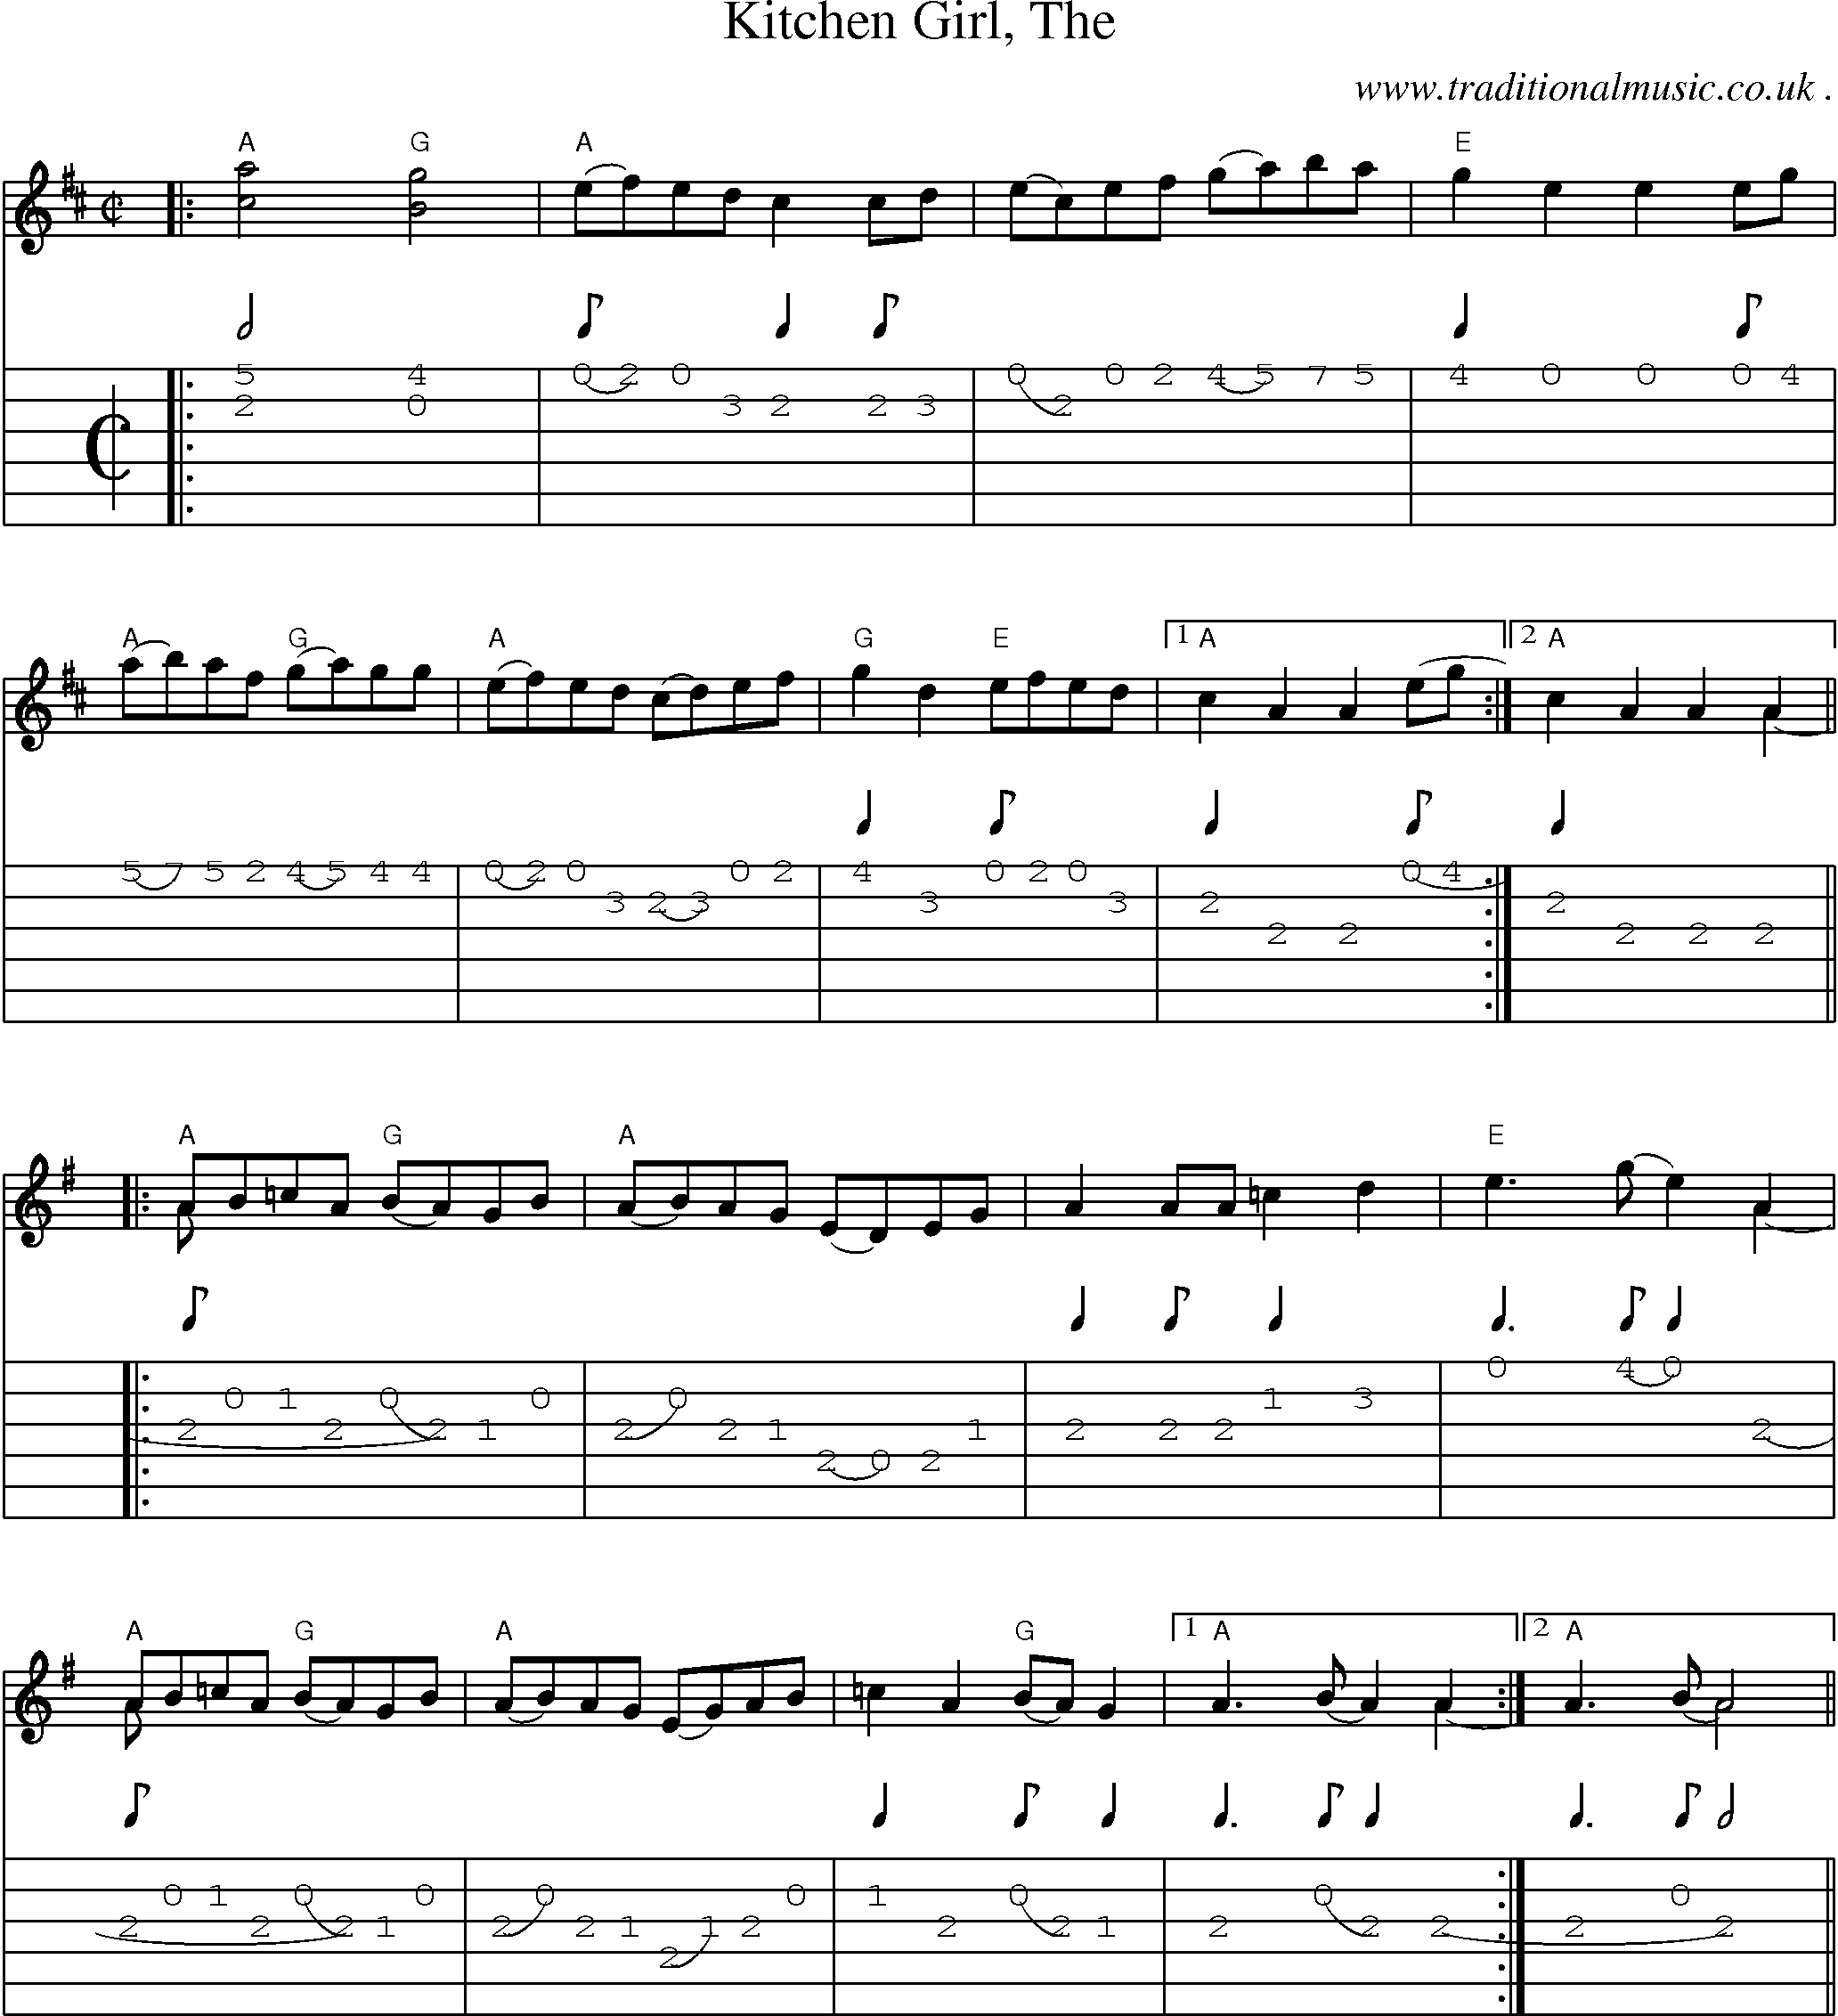 Music Score and Guitar Tabs for Kitchen Girl The